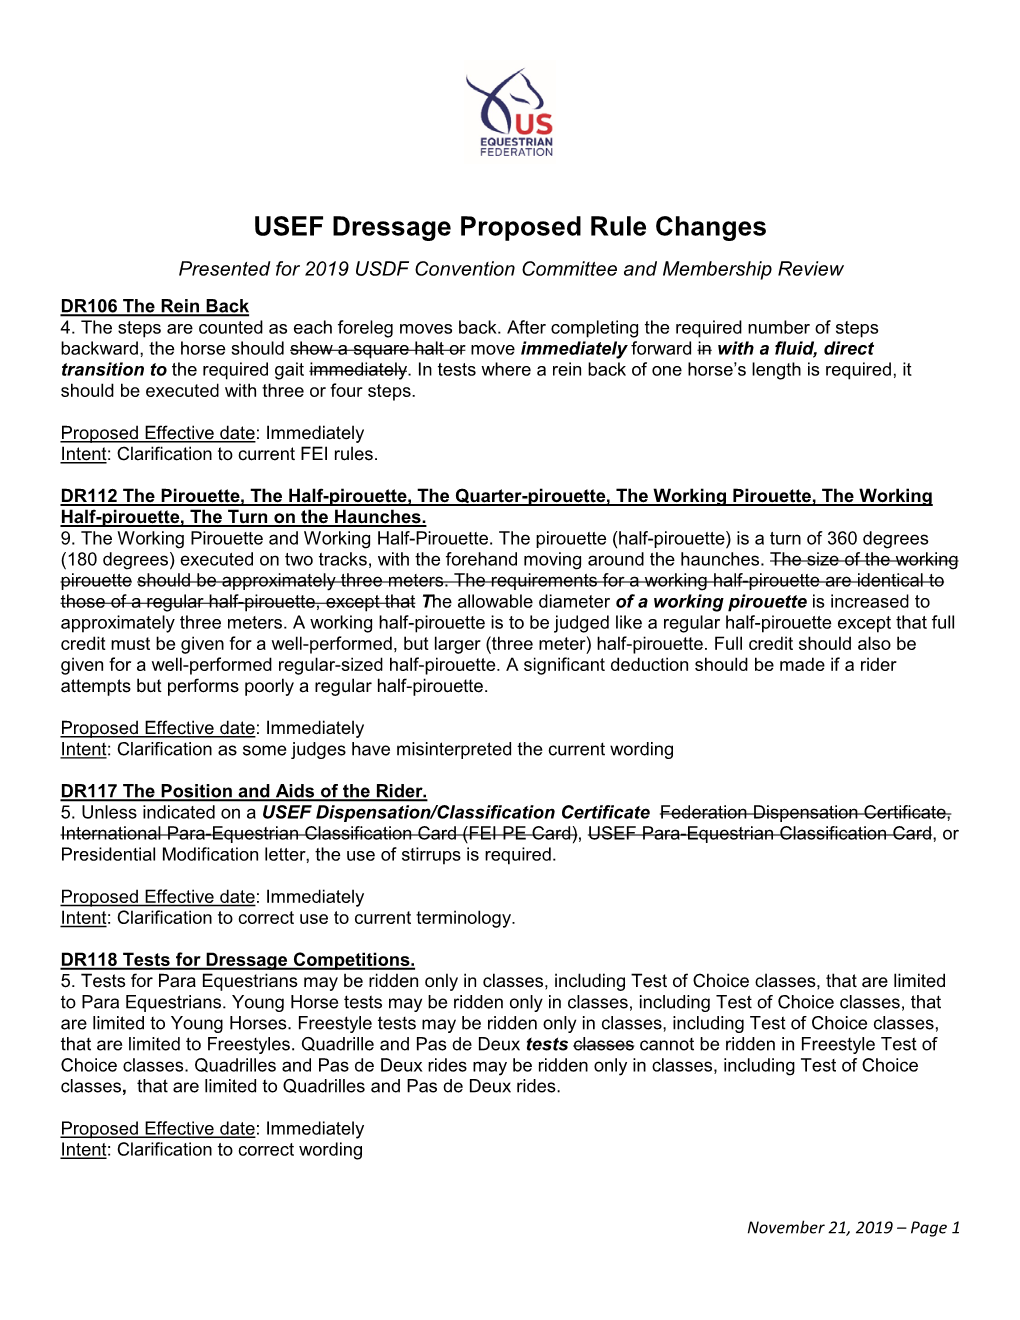 USEF Dressage Proposed Rule Changes Presented for 2019 USDF Convention Committee and Membership Review